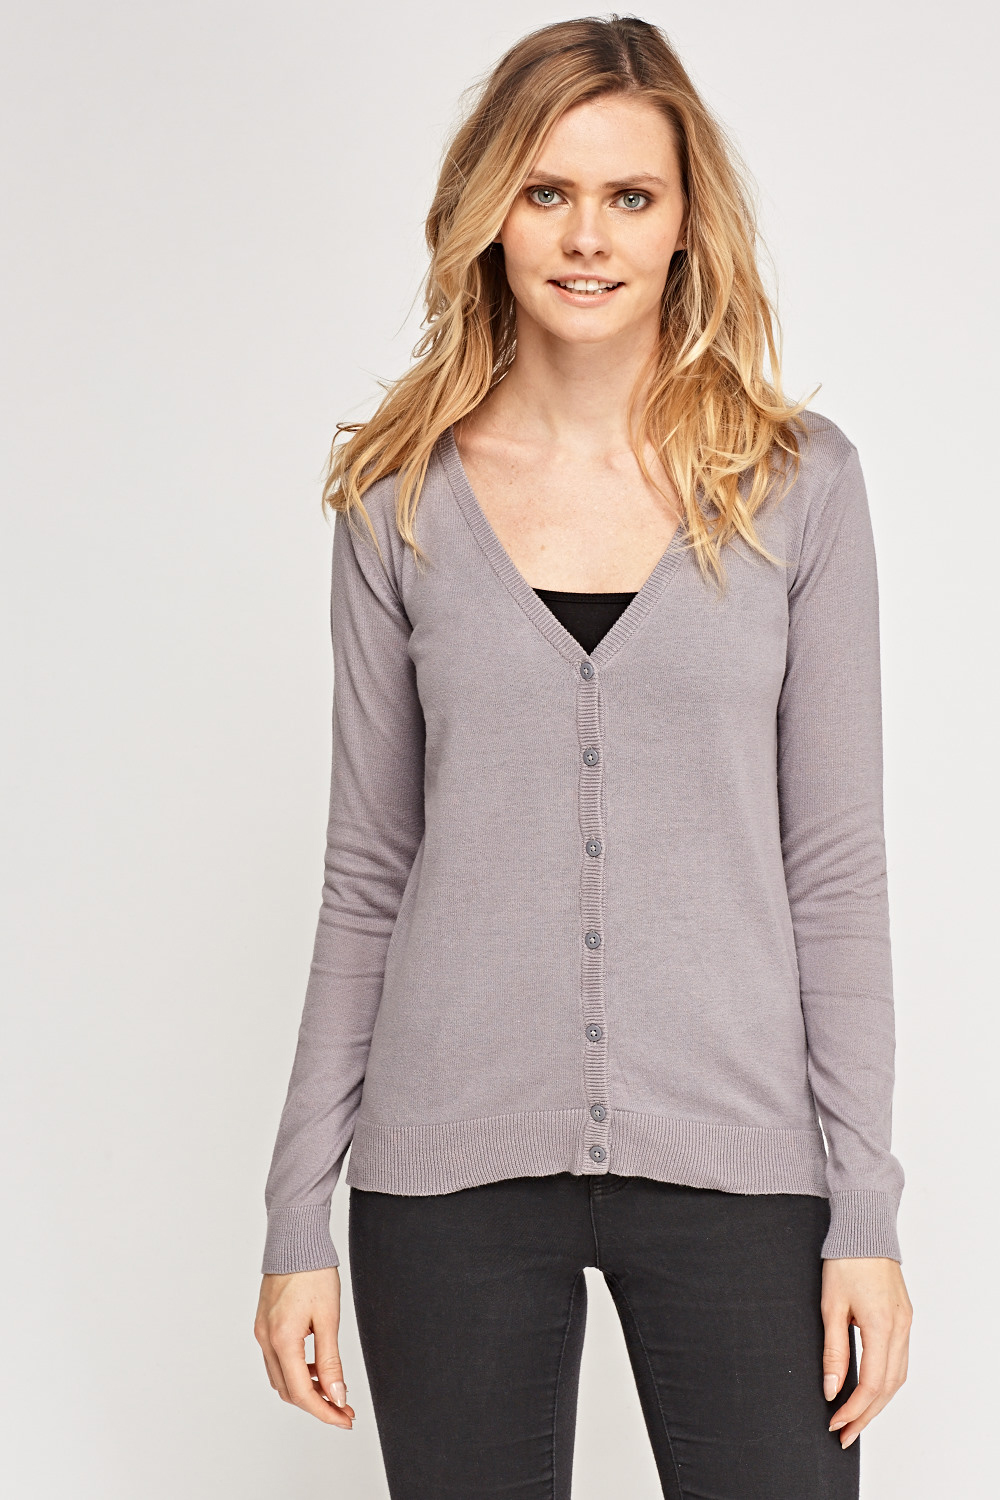 Button Up V- Neck Cardigan - Just $4